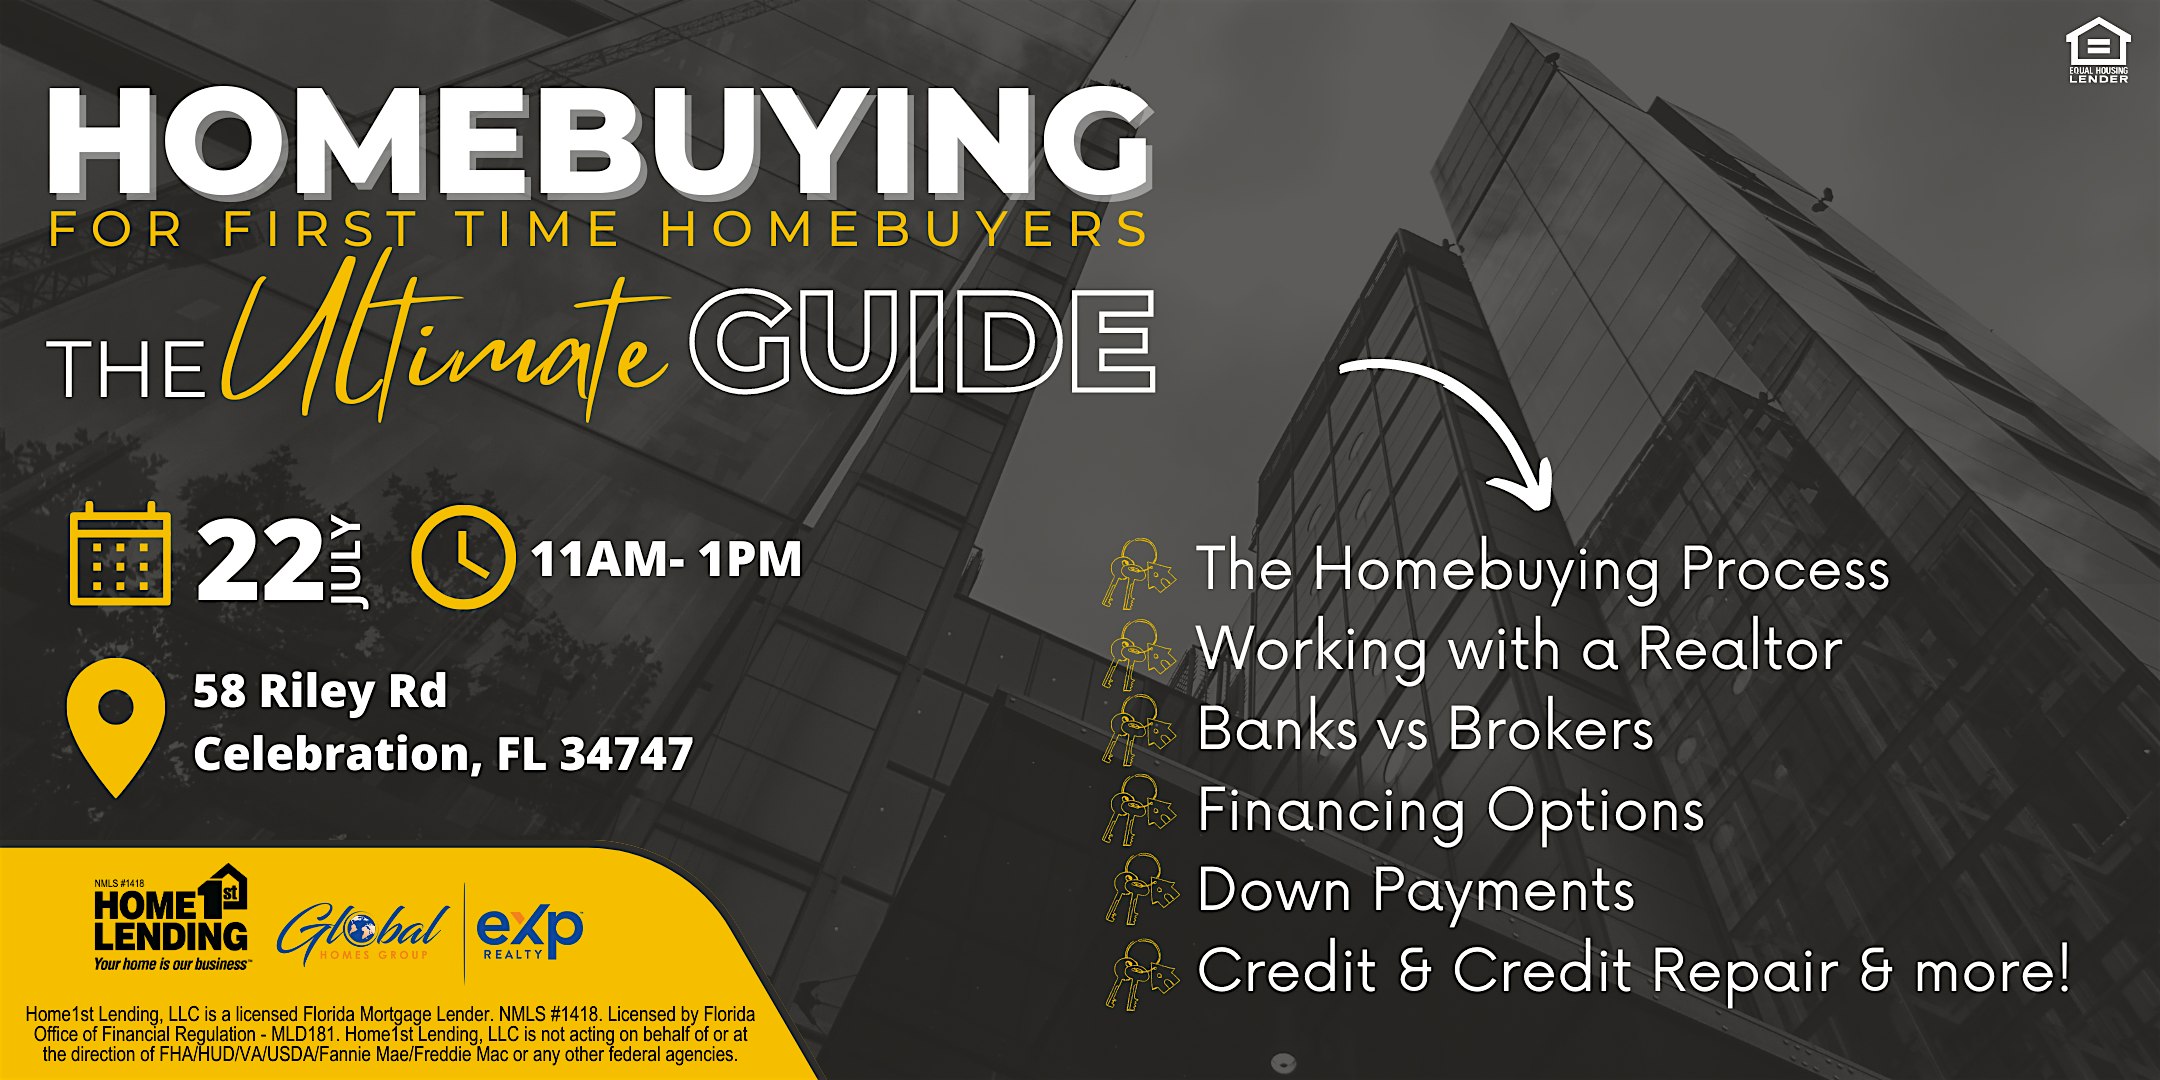 Homebuying For First Time Homebuyers: The Ultimate Guide